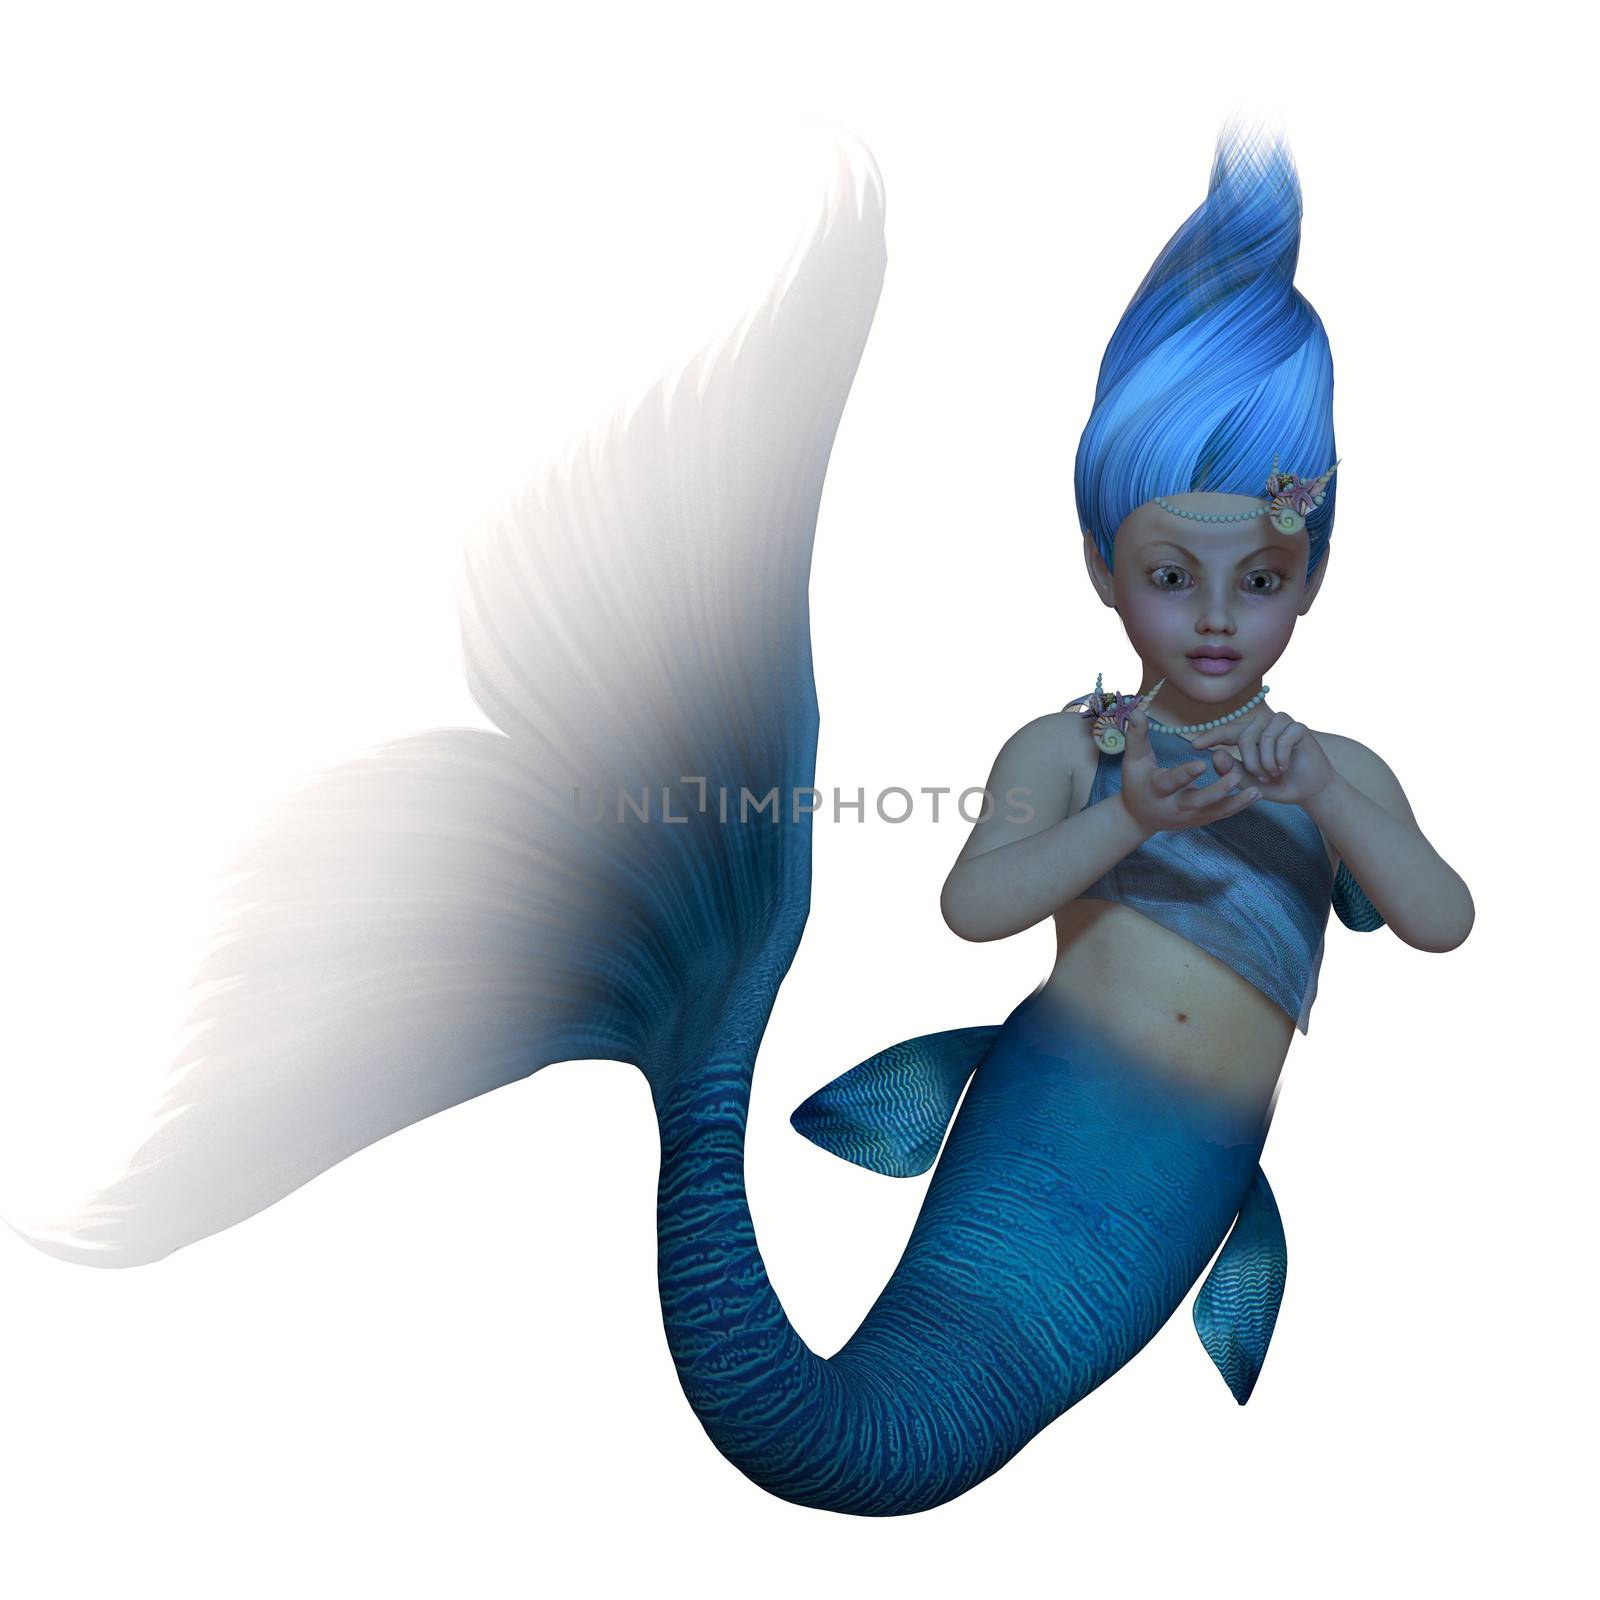 A magical legendary creature called a mermaid baby in the colors of a blue fish.